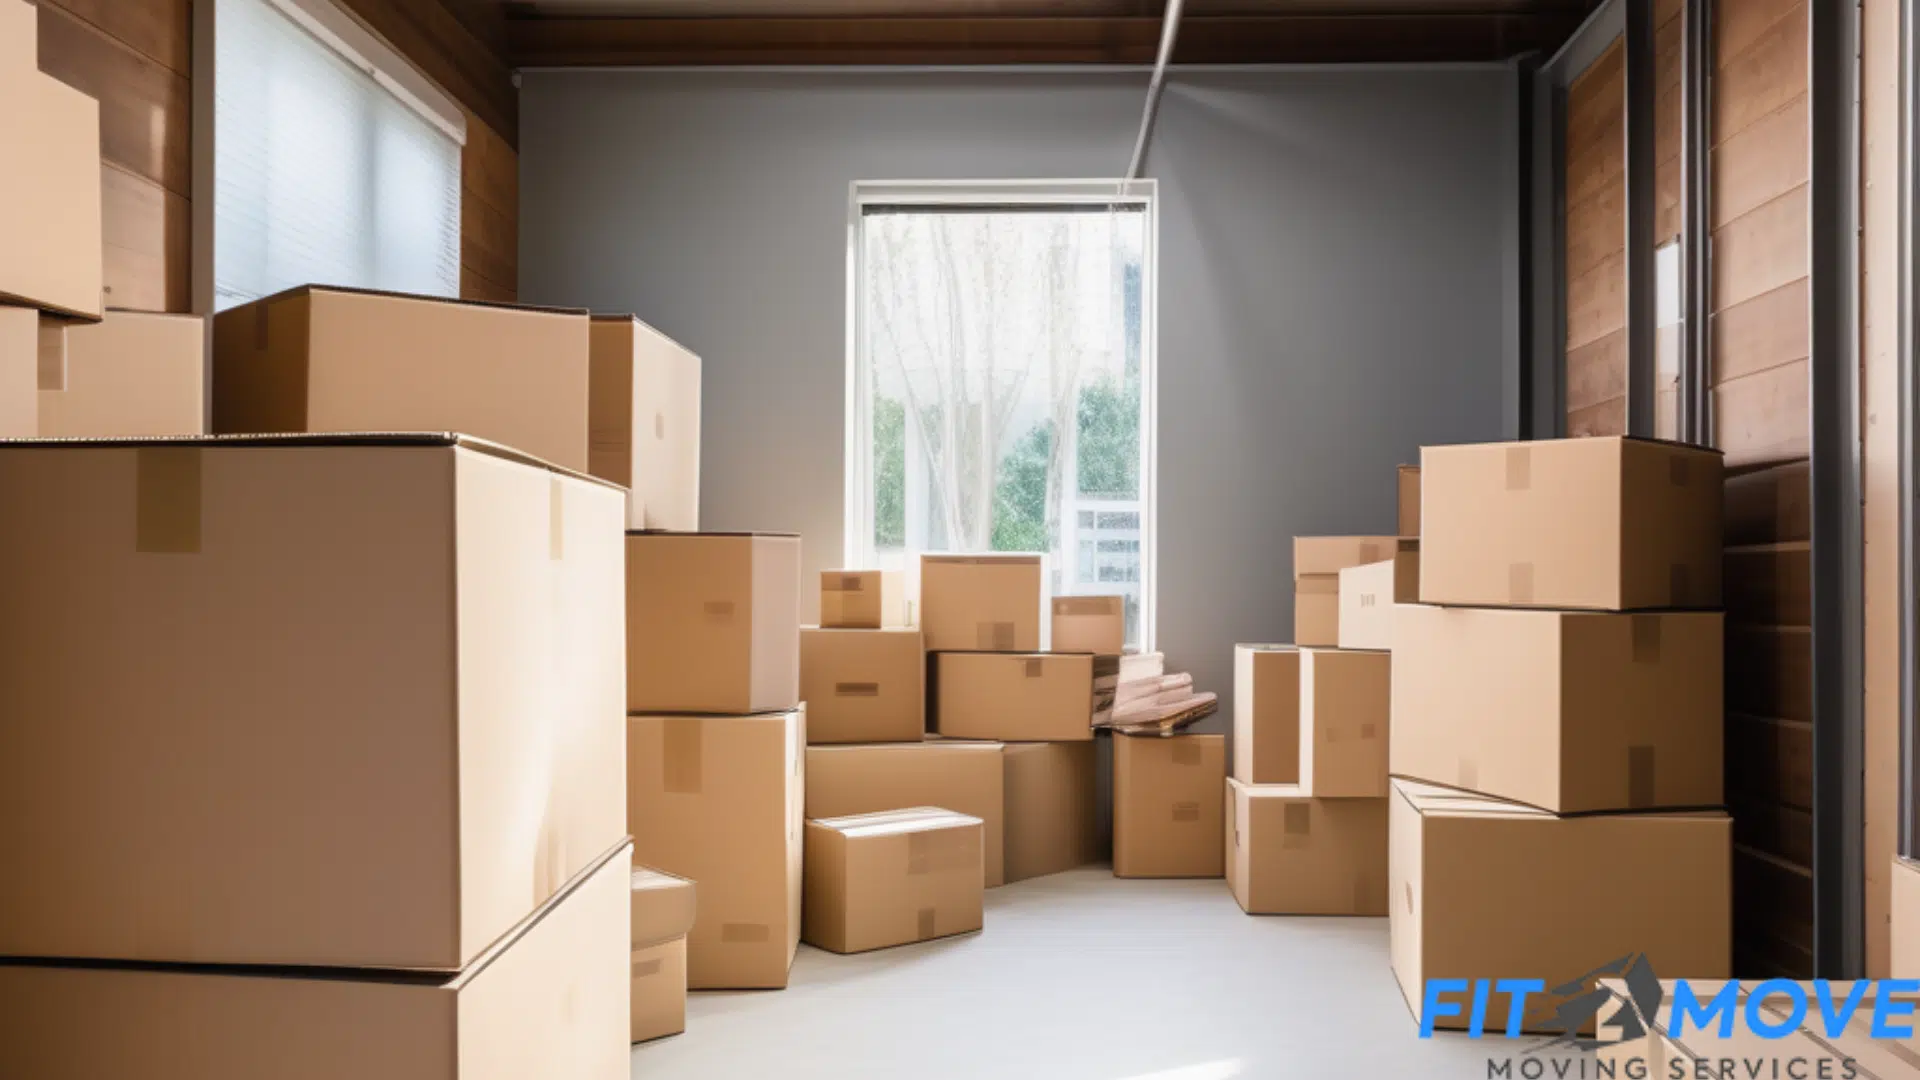 Packing and Moving Movers Companies in Dover New Hampshire